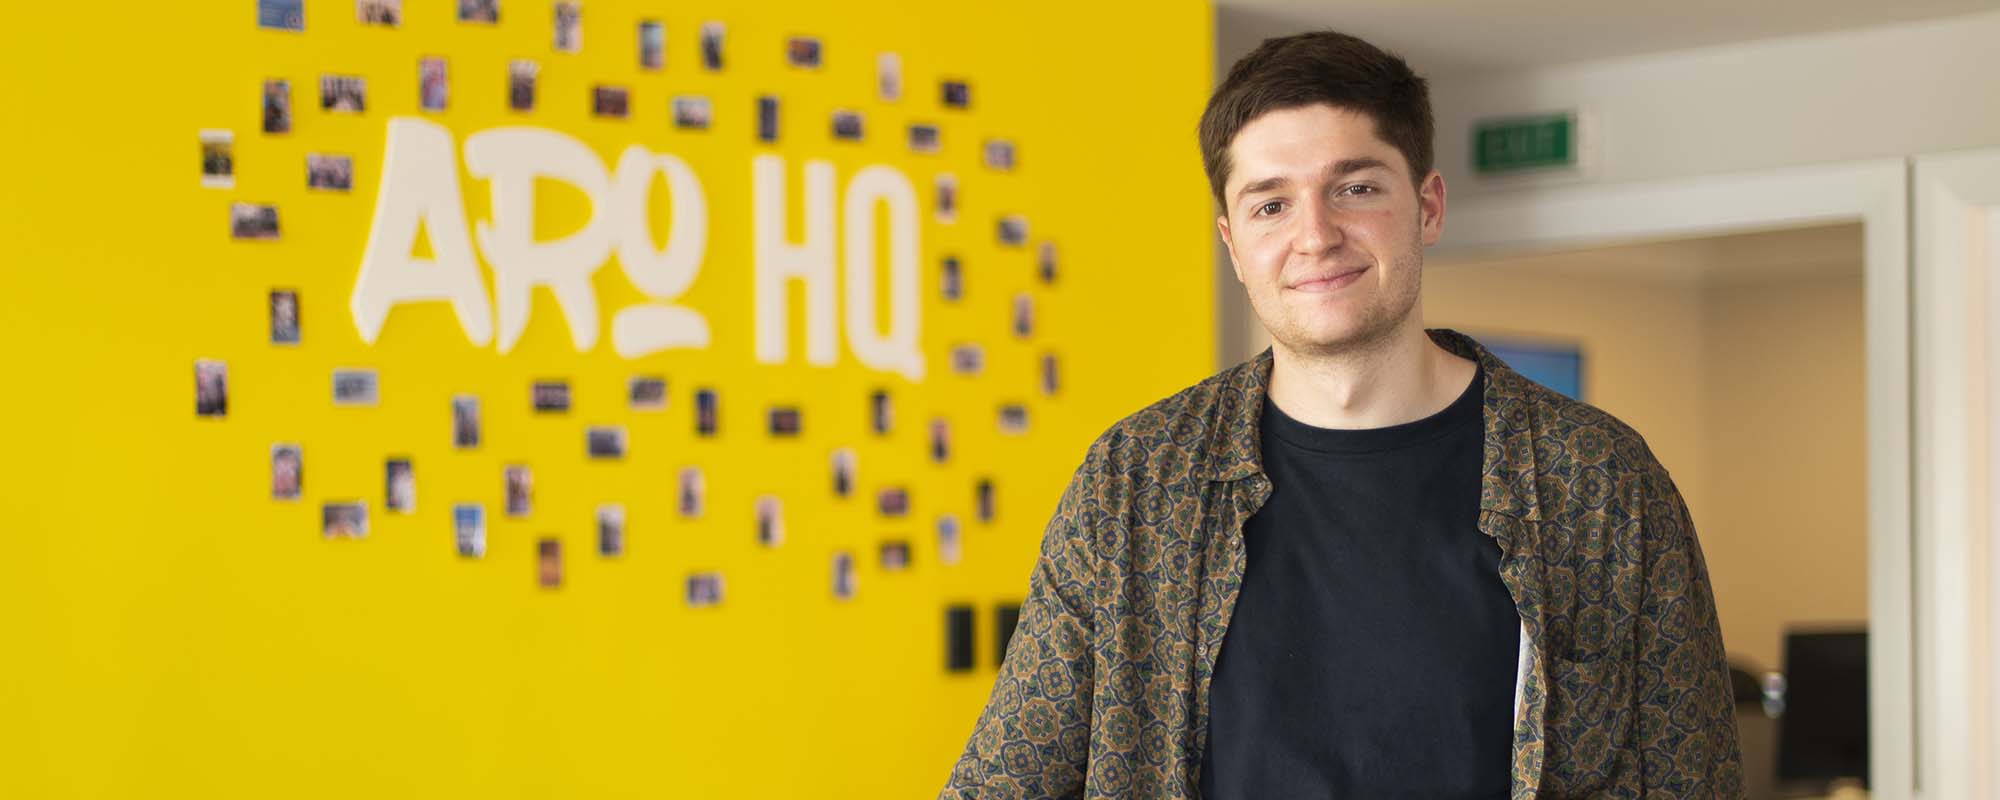 Daniel Raats stands smiling in front of a wall with 'Aro Digital' written in white on a yellow background.